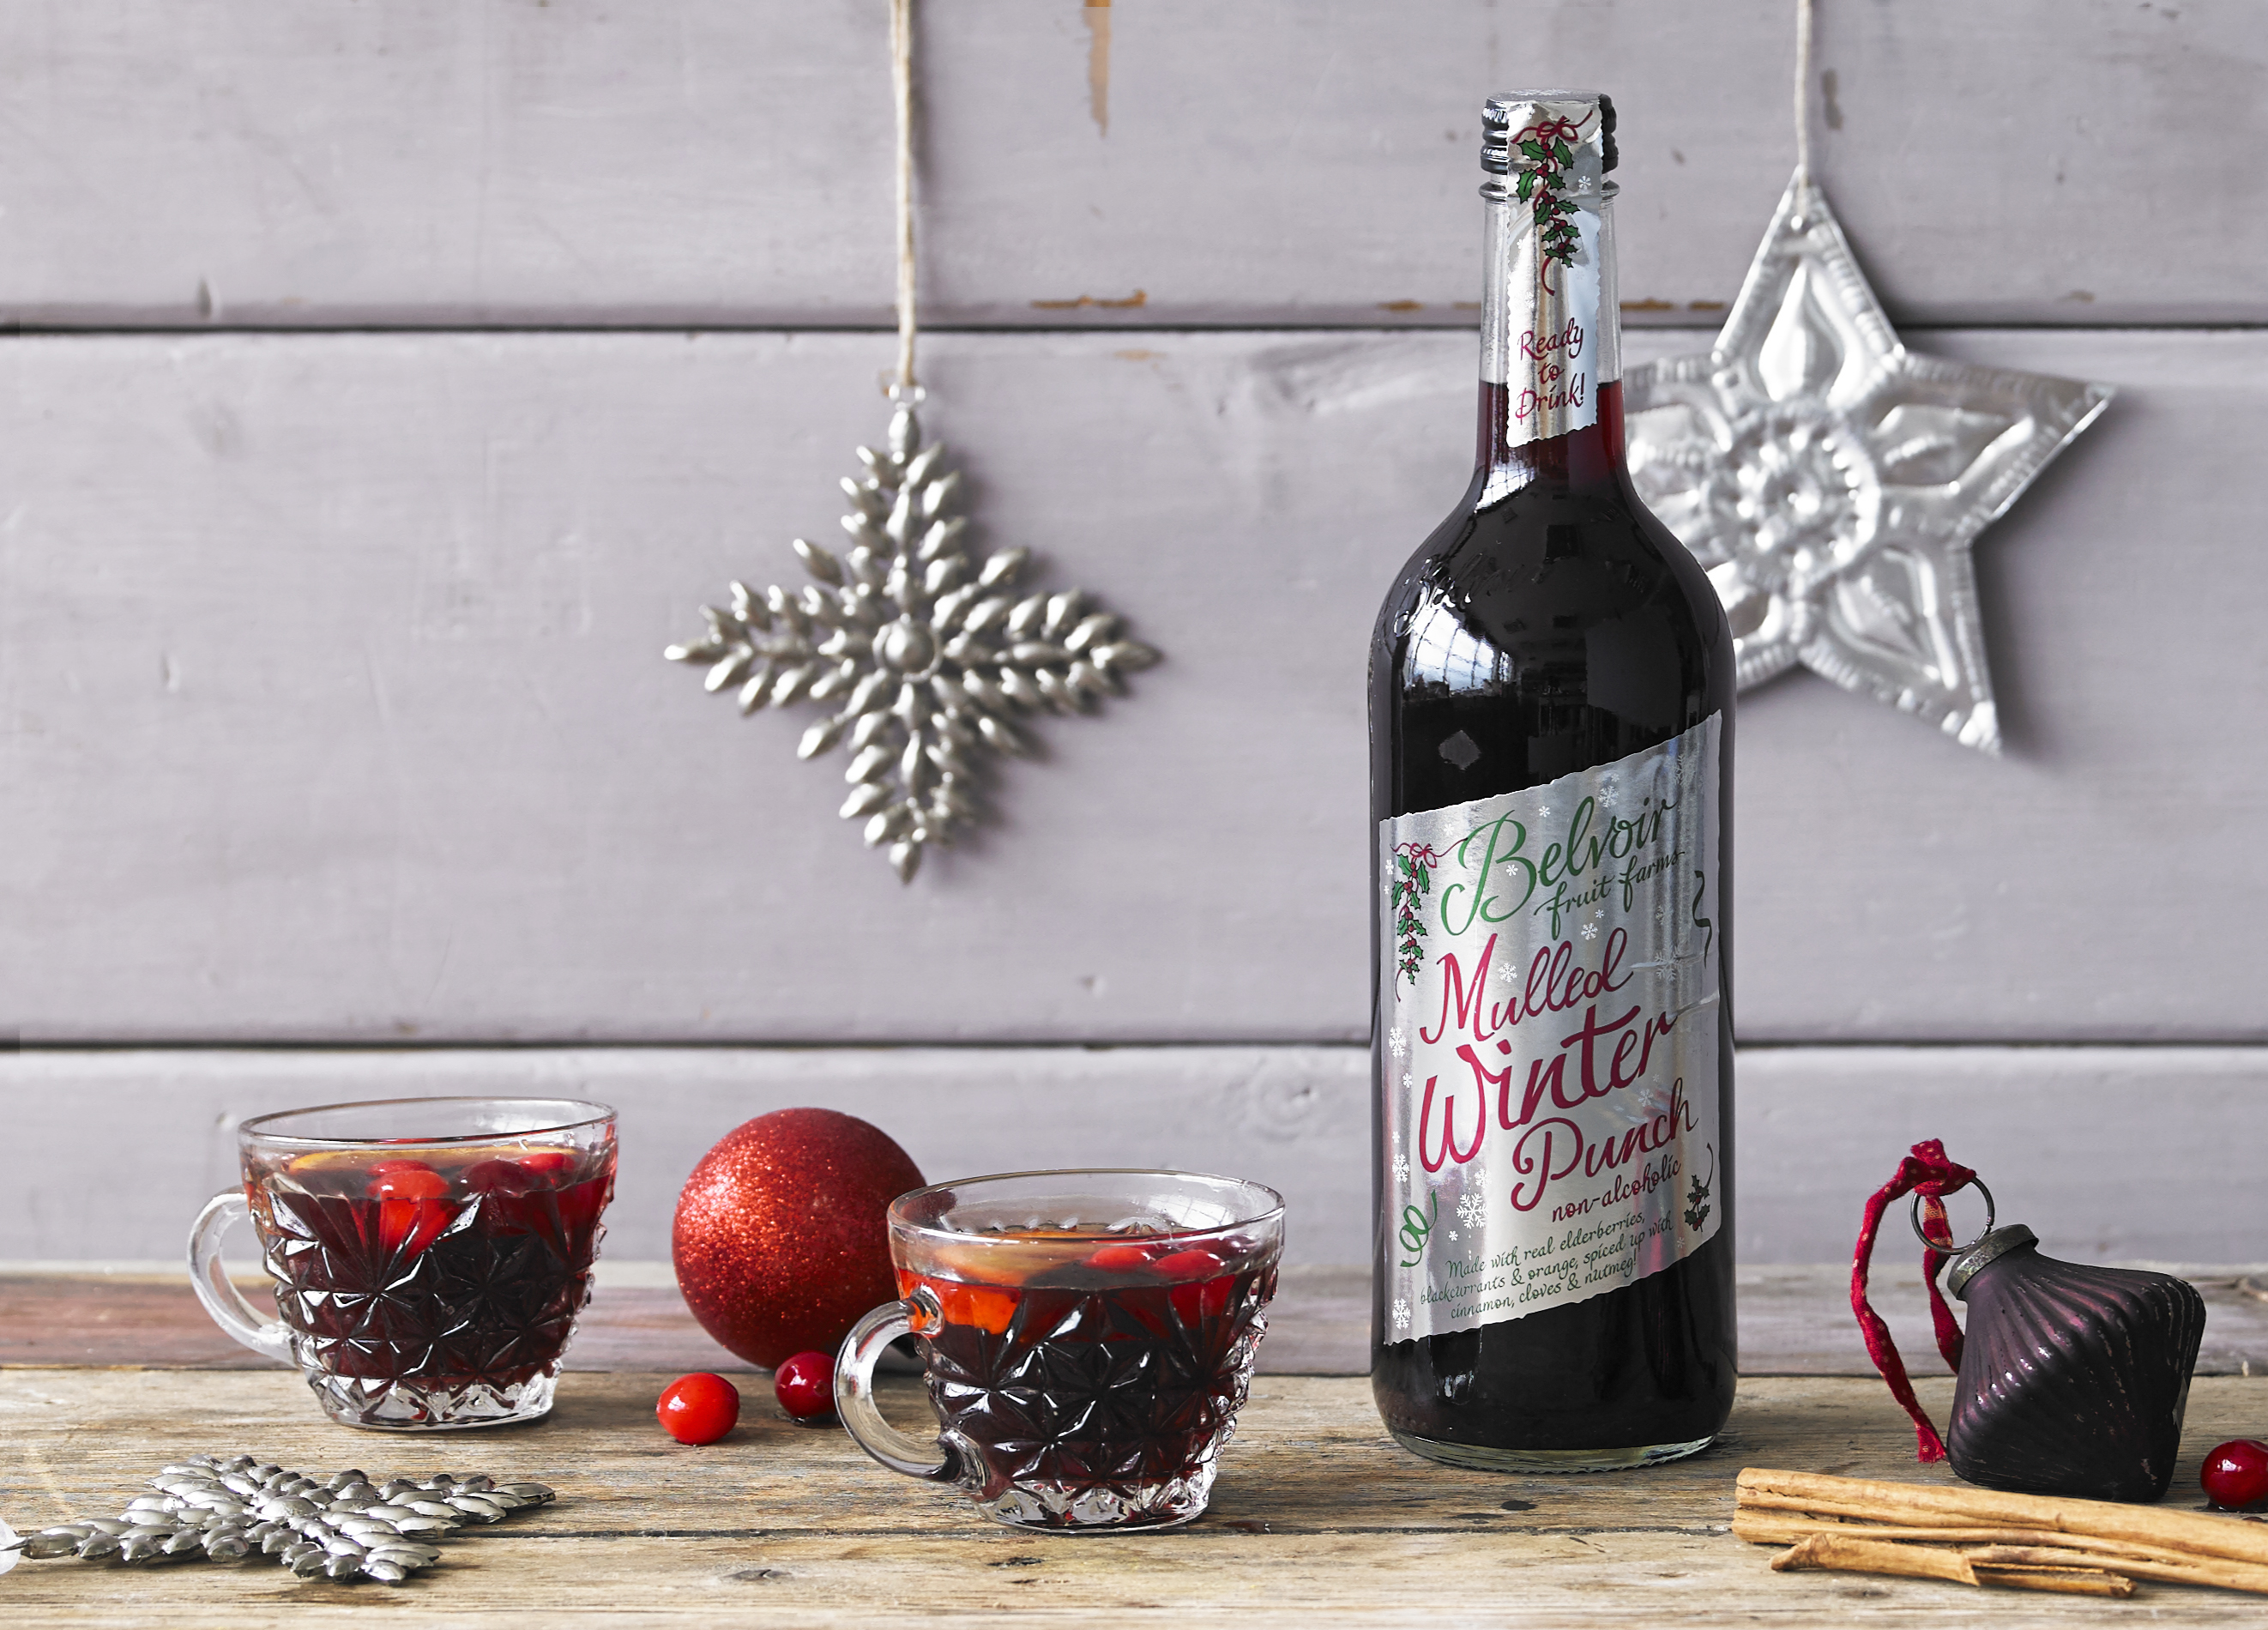 Mulled Winter Punch by Belvoir